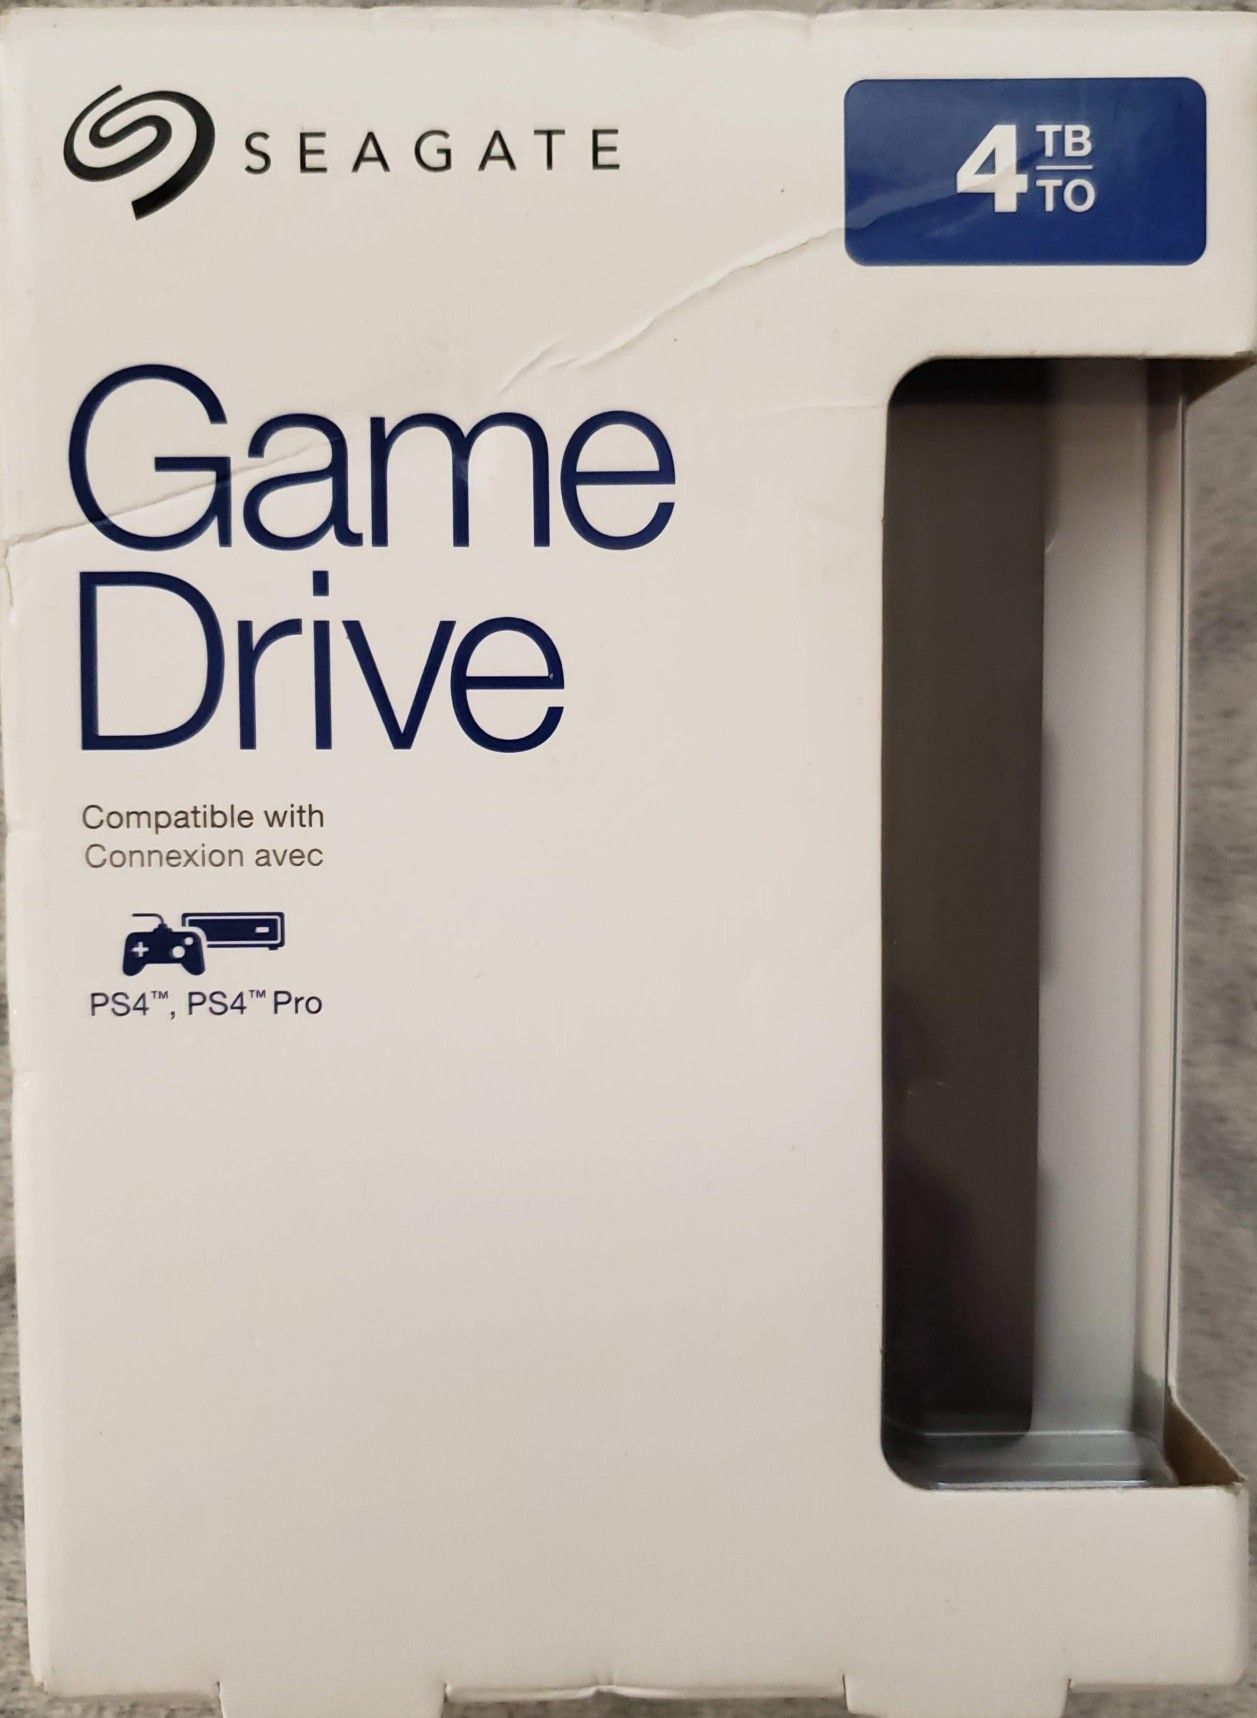 4TB Game Drive from Seagate for PS4 and PS4 Pro (factory sealed)